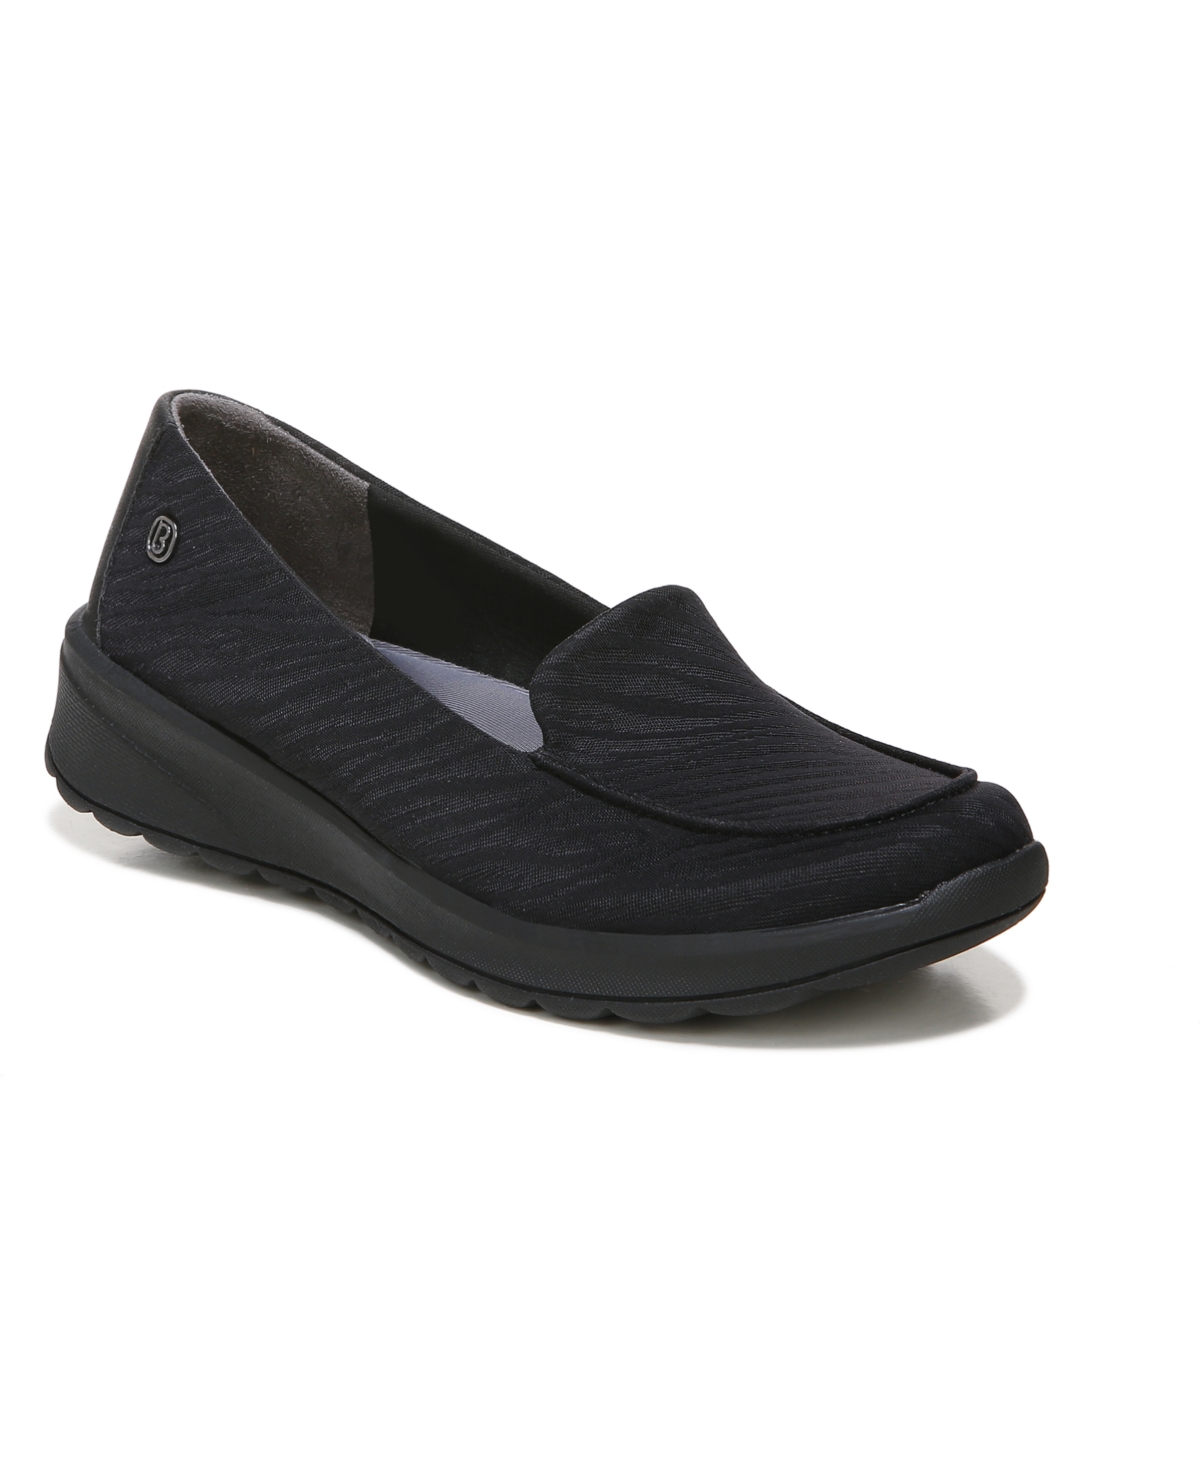 BZees Get Movin' Washable Slip-on Flats Women's Shoes